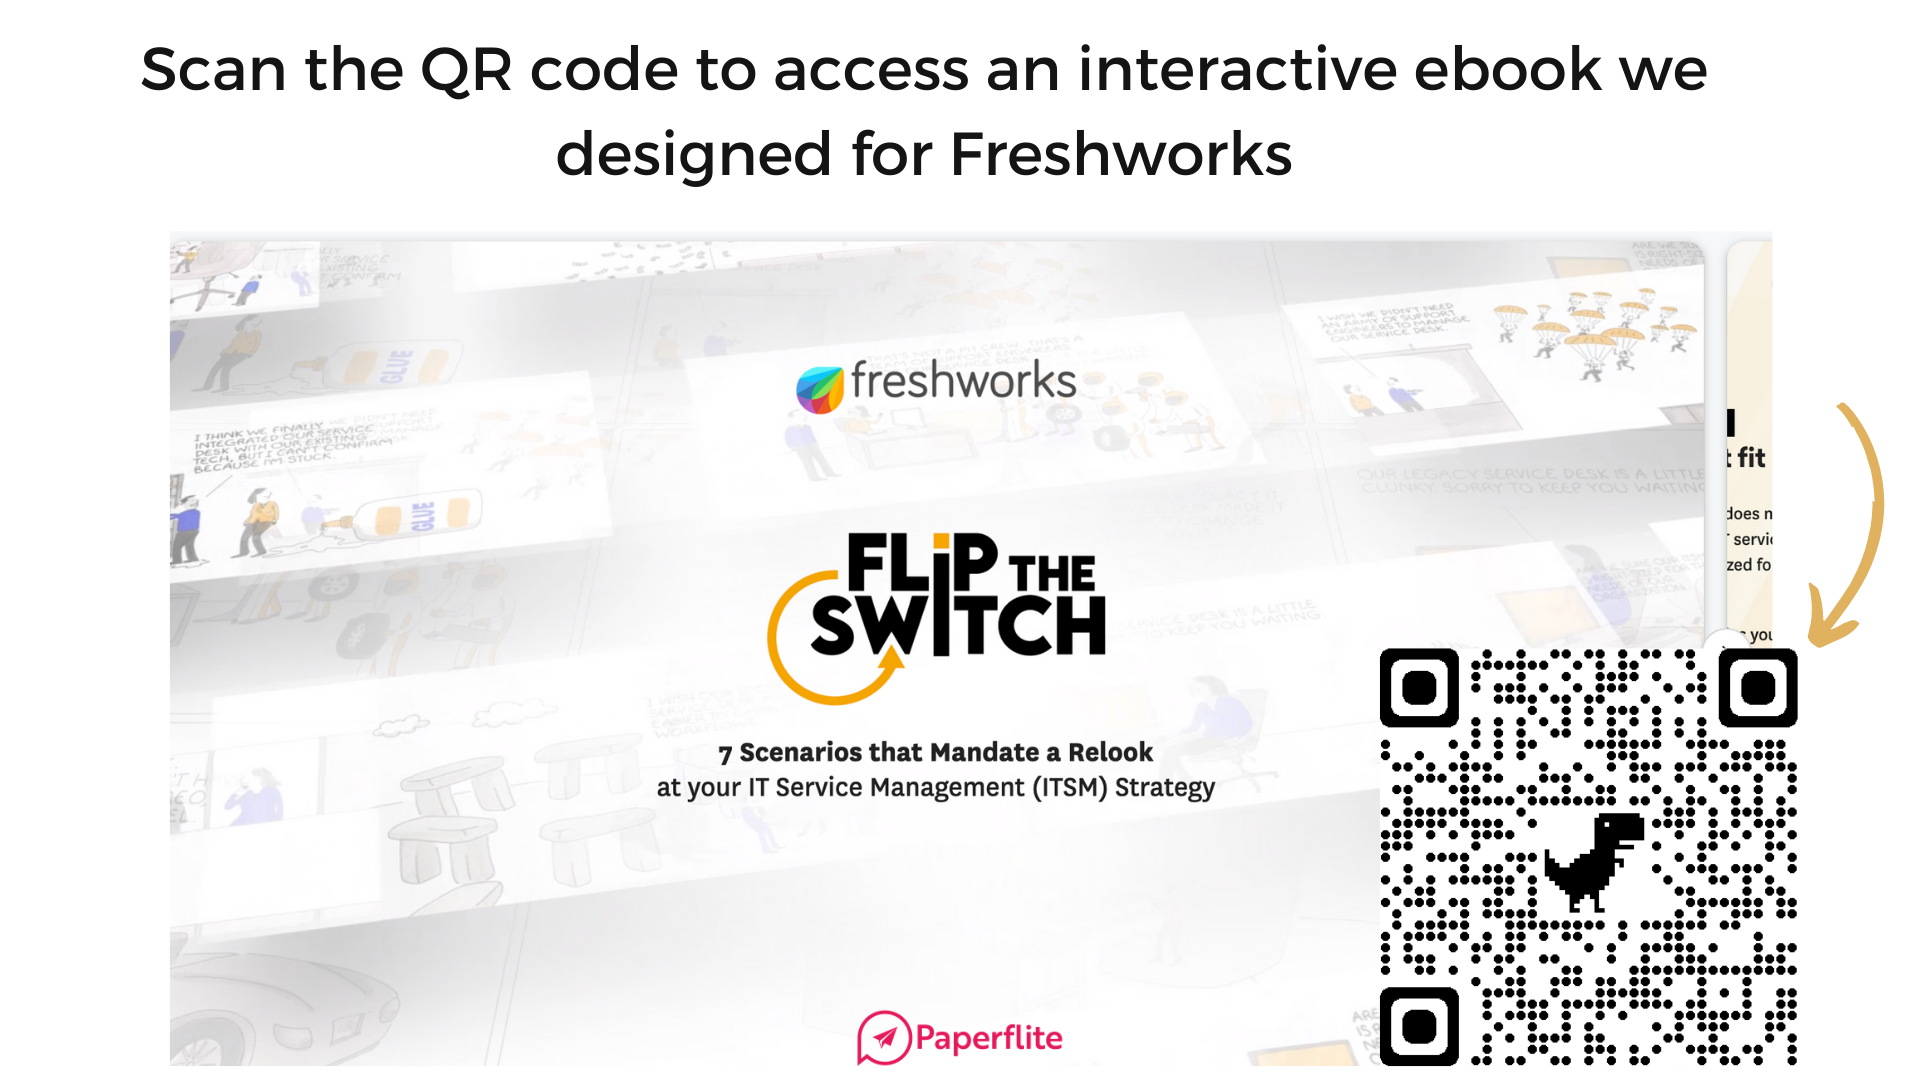 interactive ebook content_Paperflite_Freshworks